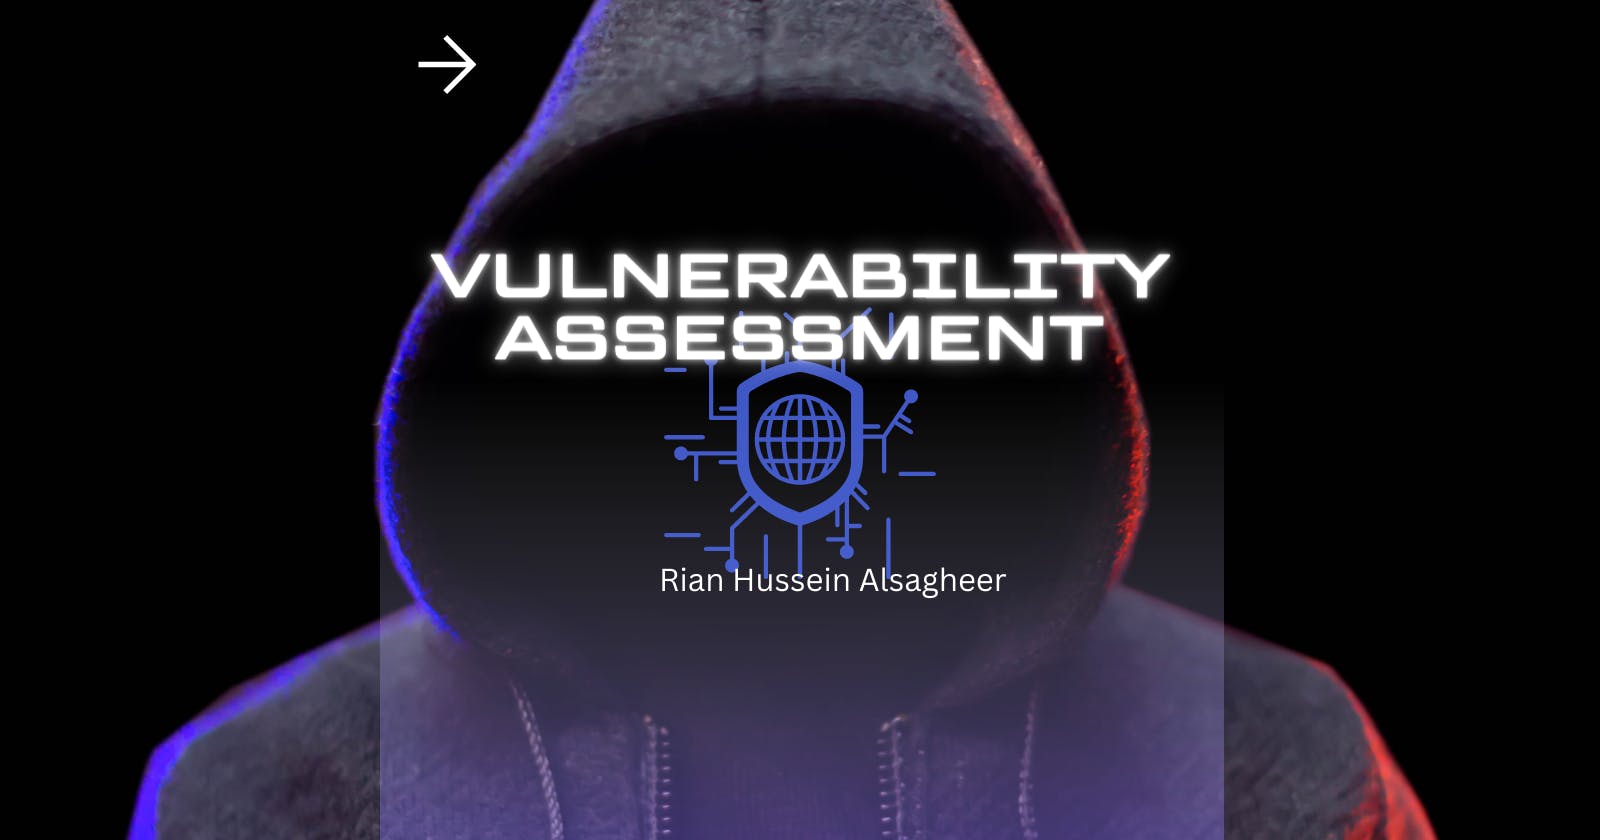 The Vulnerability Assessment Process and How To Perform It